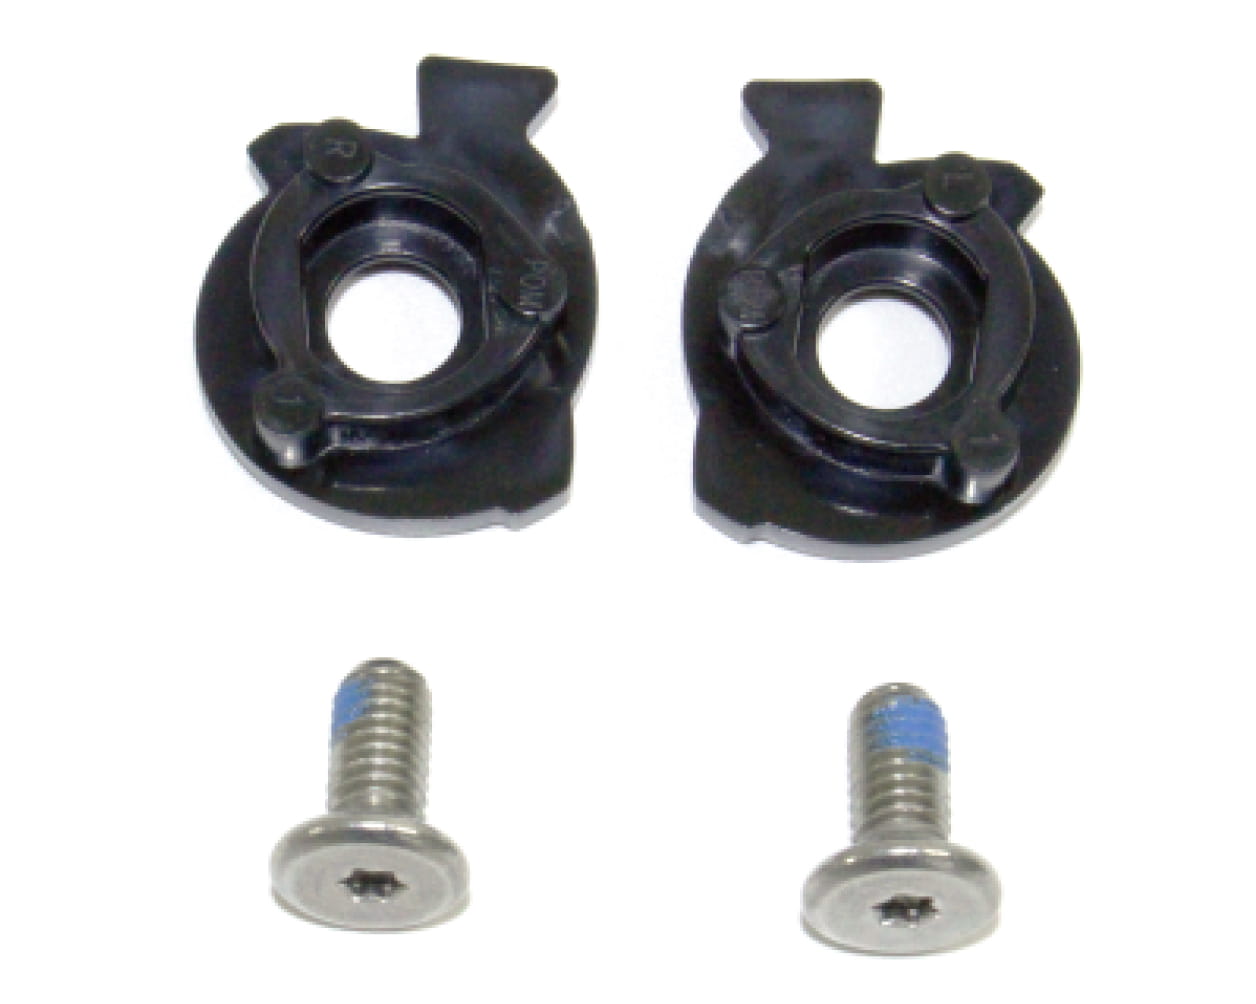 NEOTEC2 FACE COVER SCREW SET